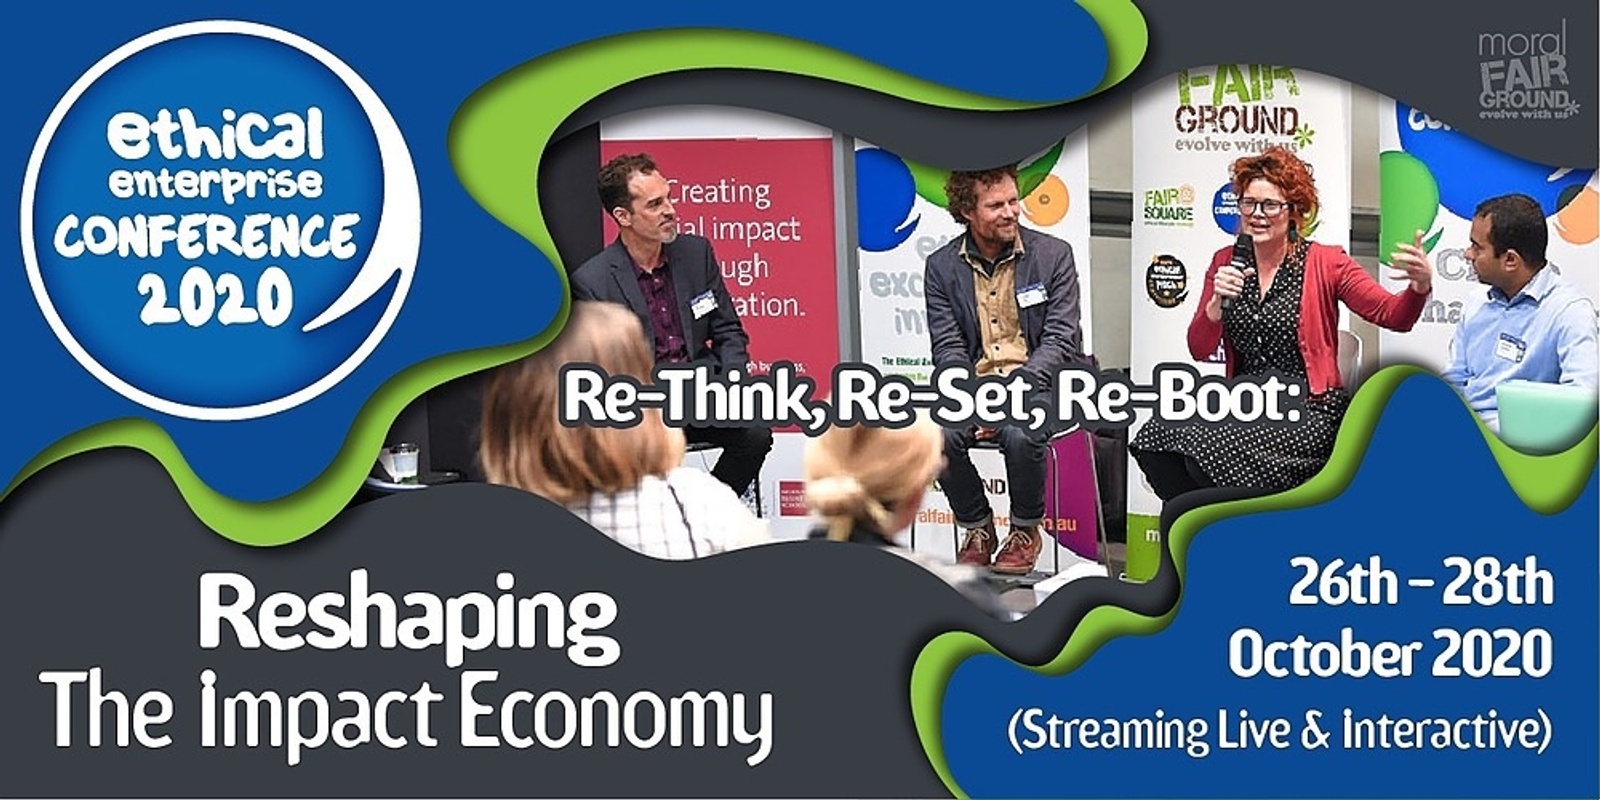 Banner image for Ethical Enterprise Conference 2020 - Reshaping the Impact Economy